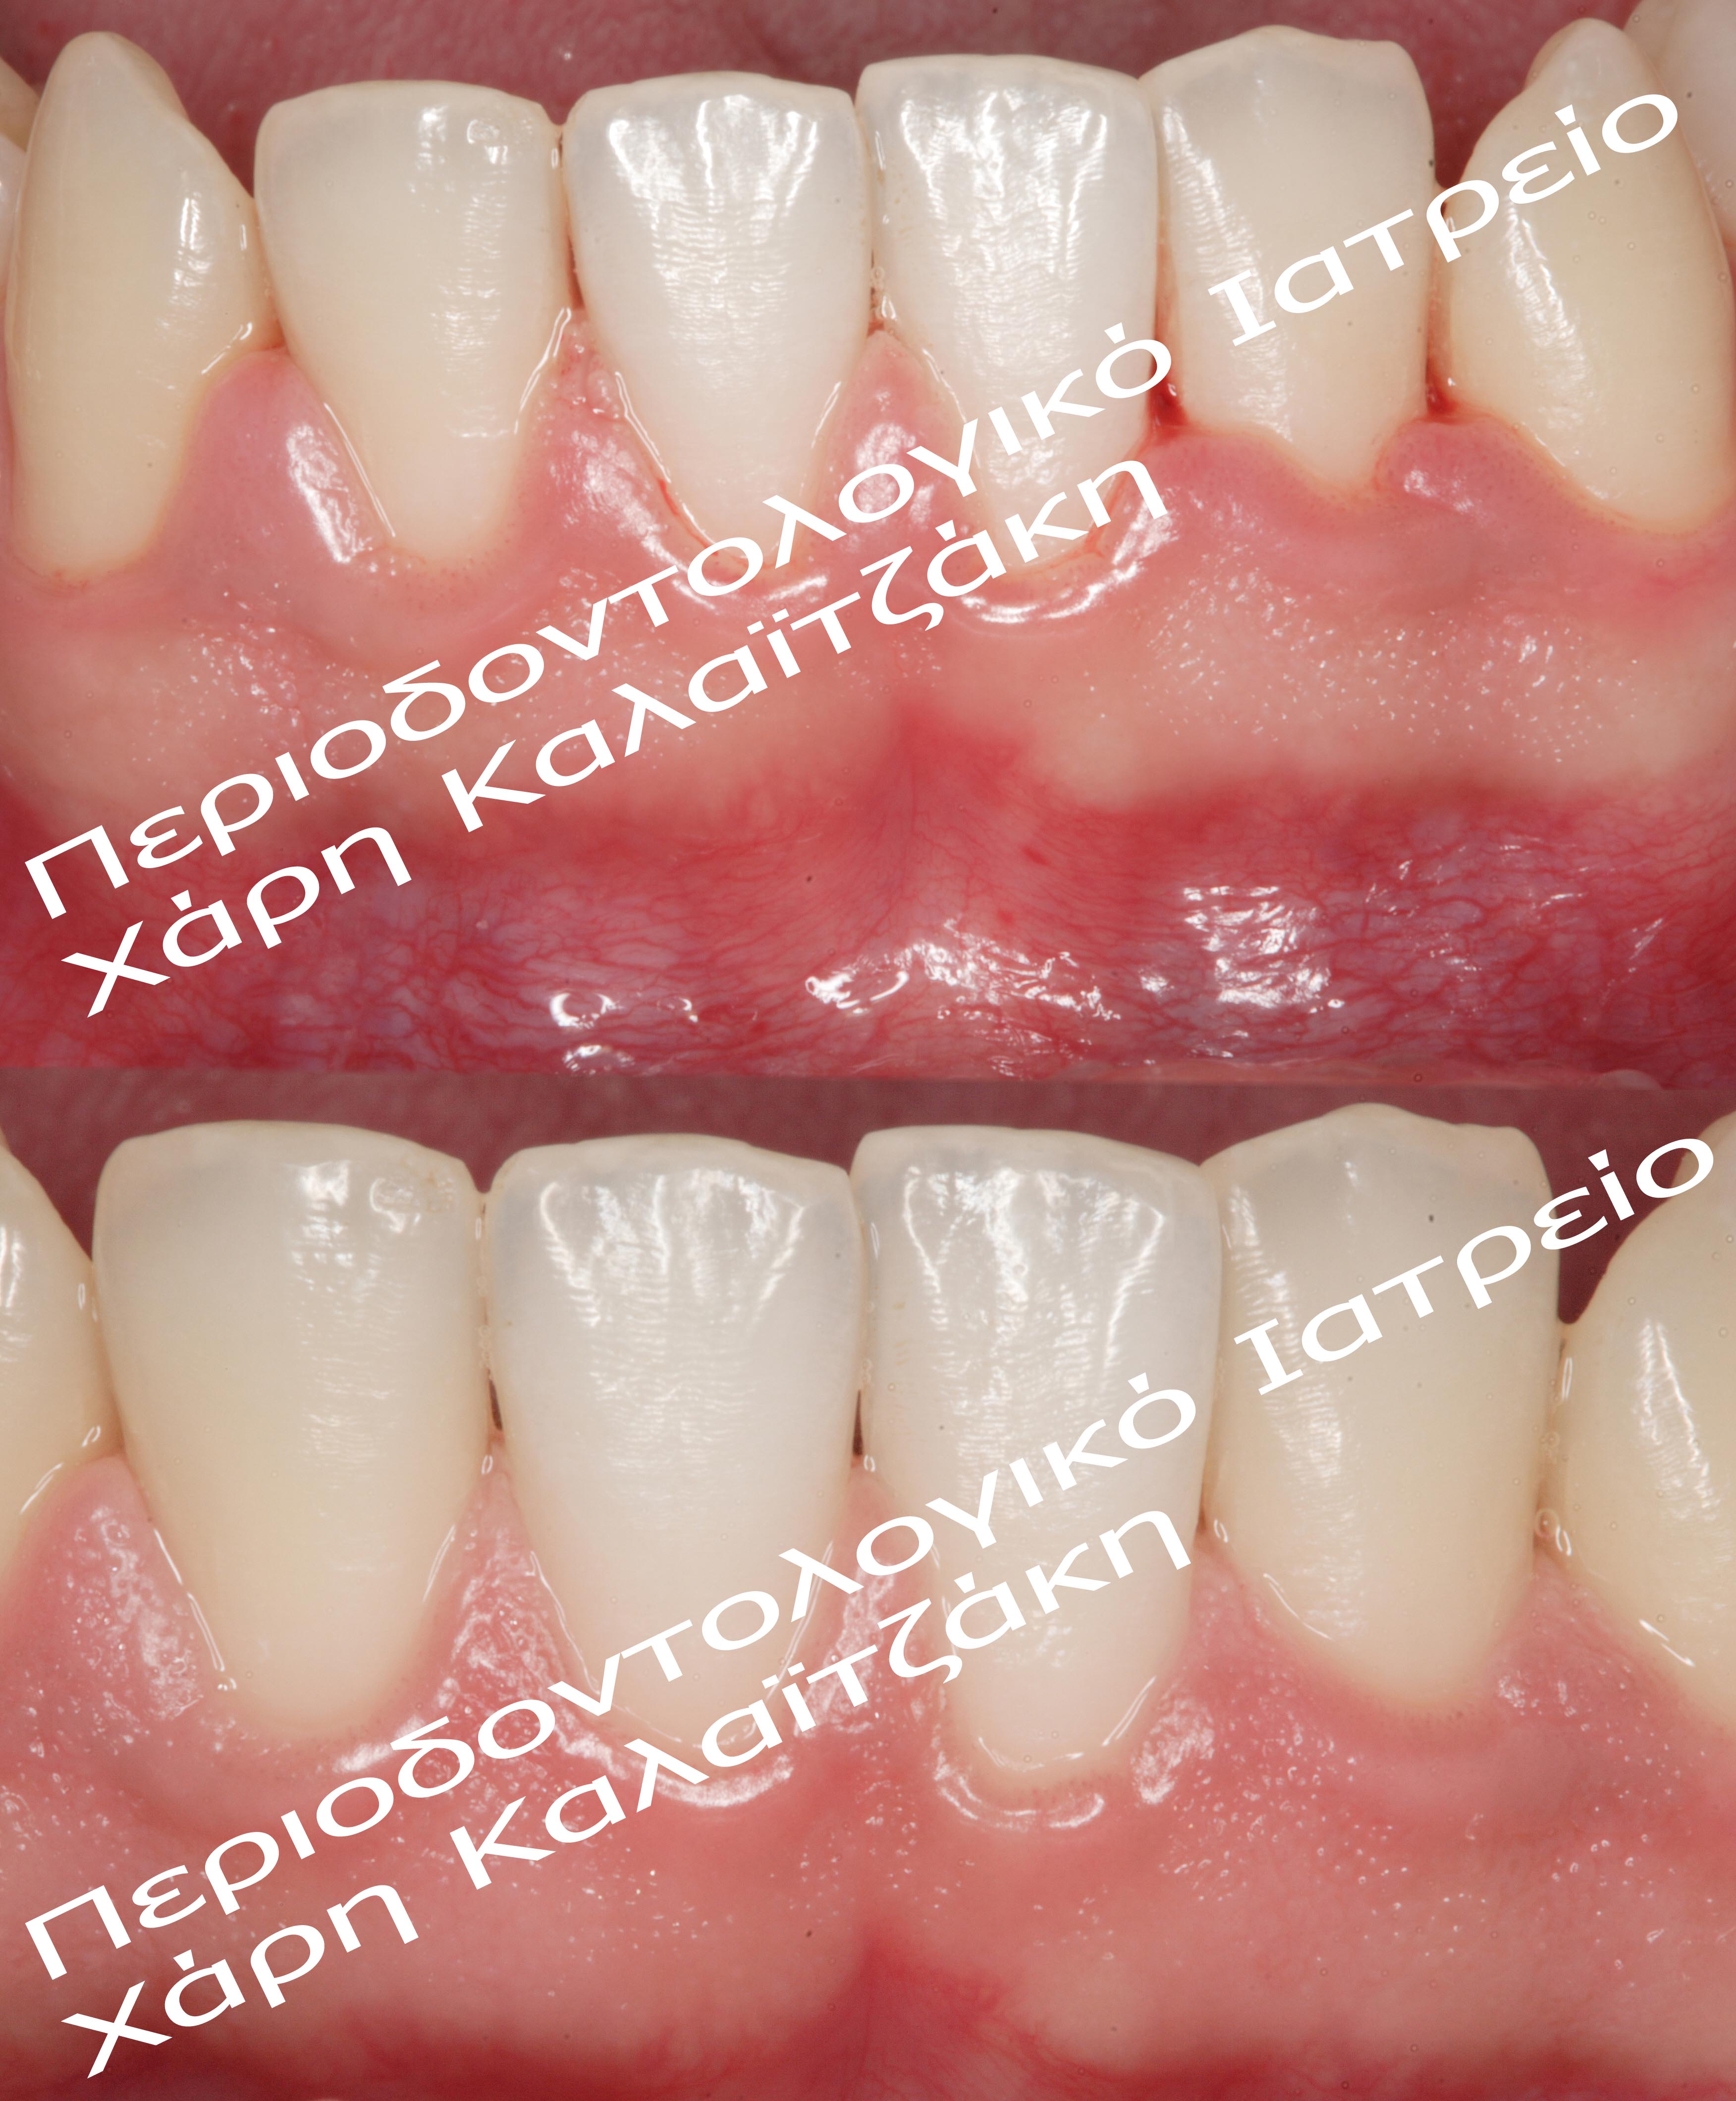 Before & after treatment_ΒΚ